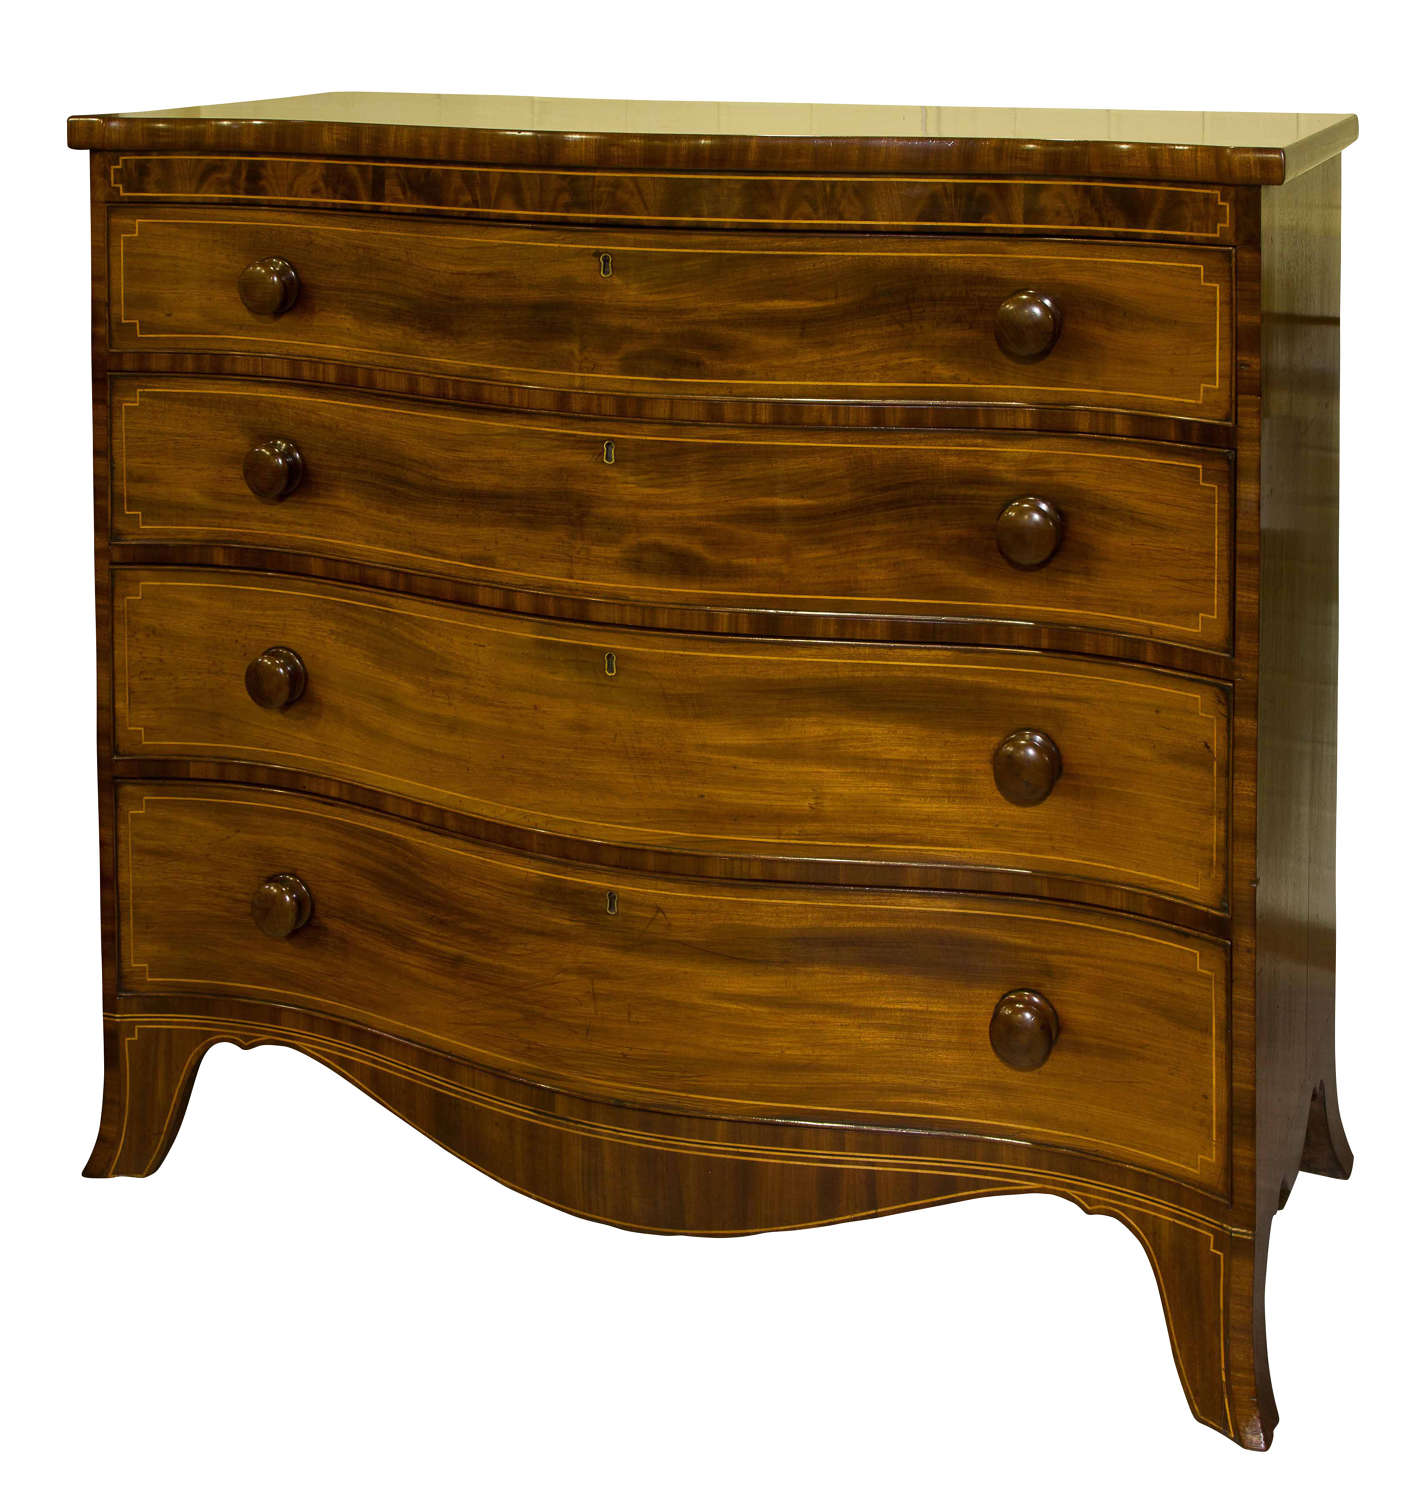 George III Mahogany serpentine fronted chest of drawers